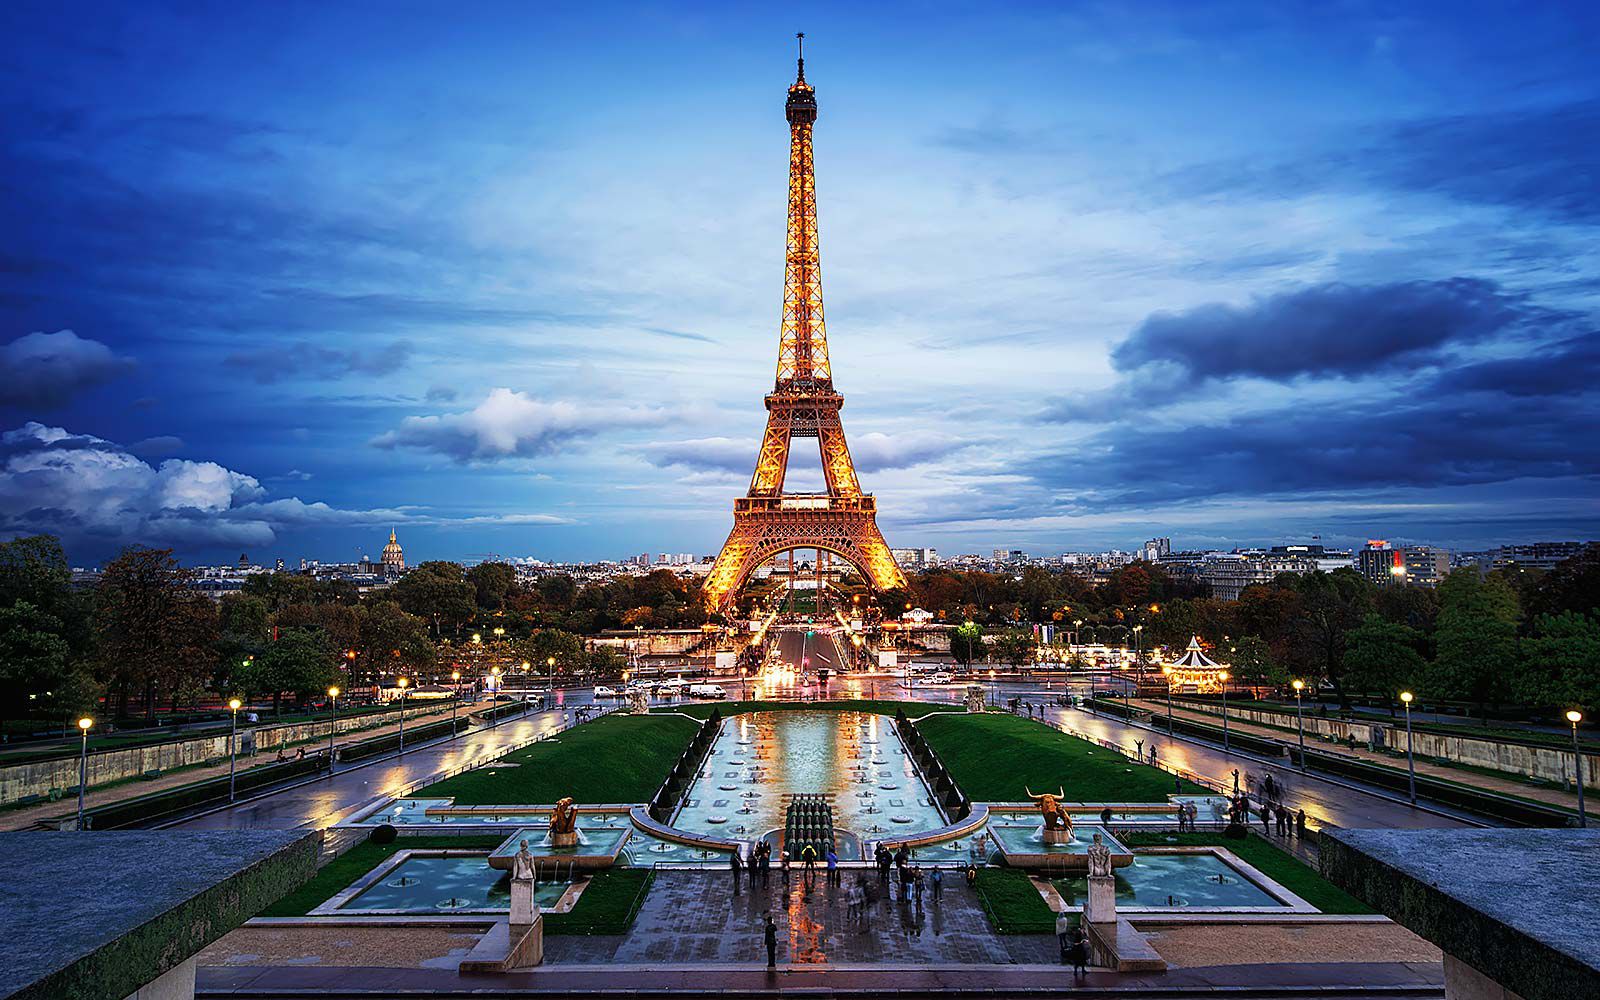 A stunning view of Eiffel Tower, France